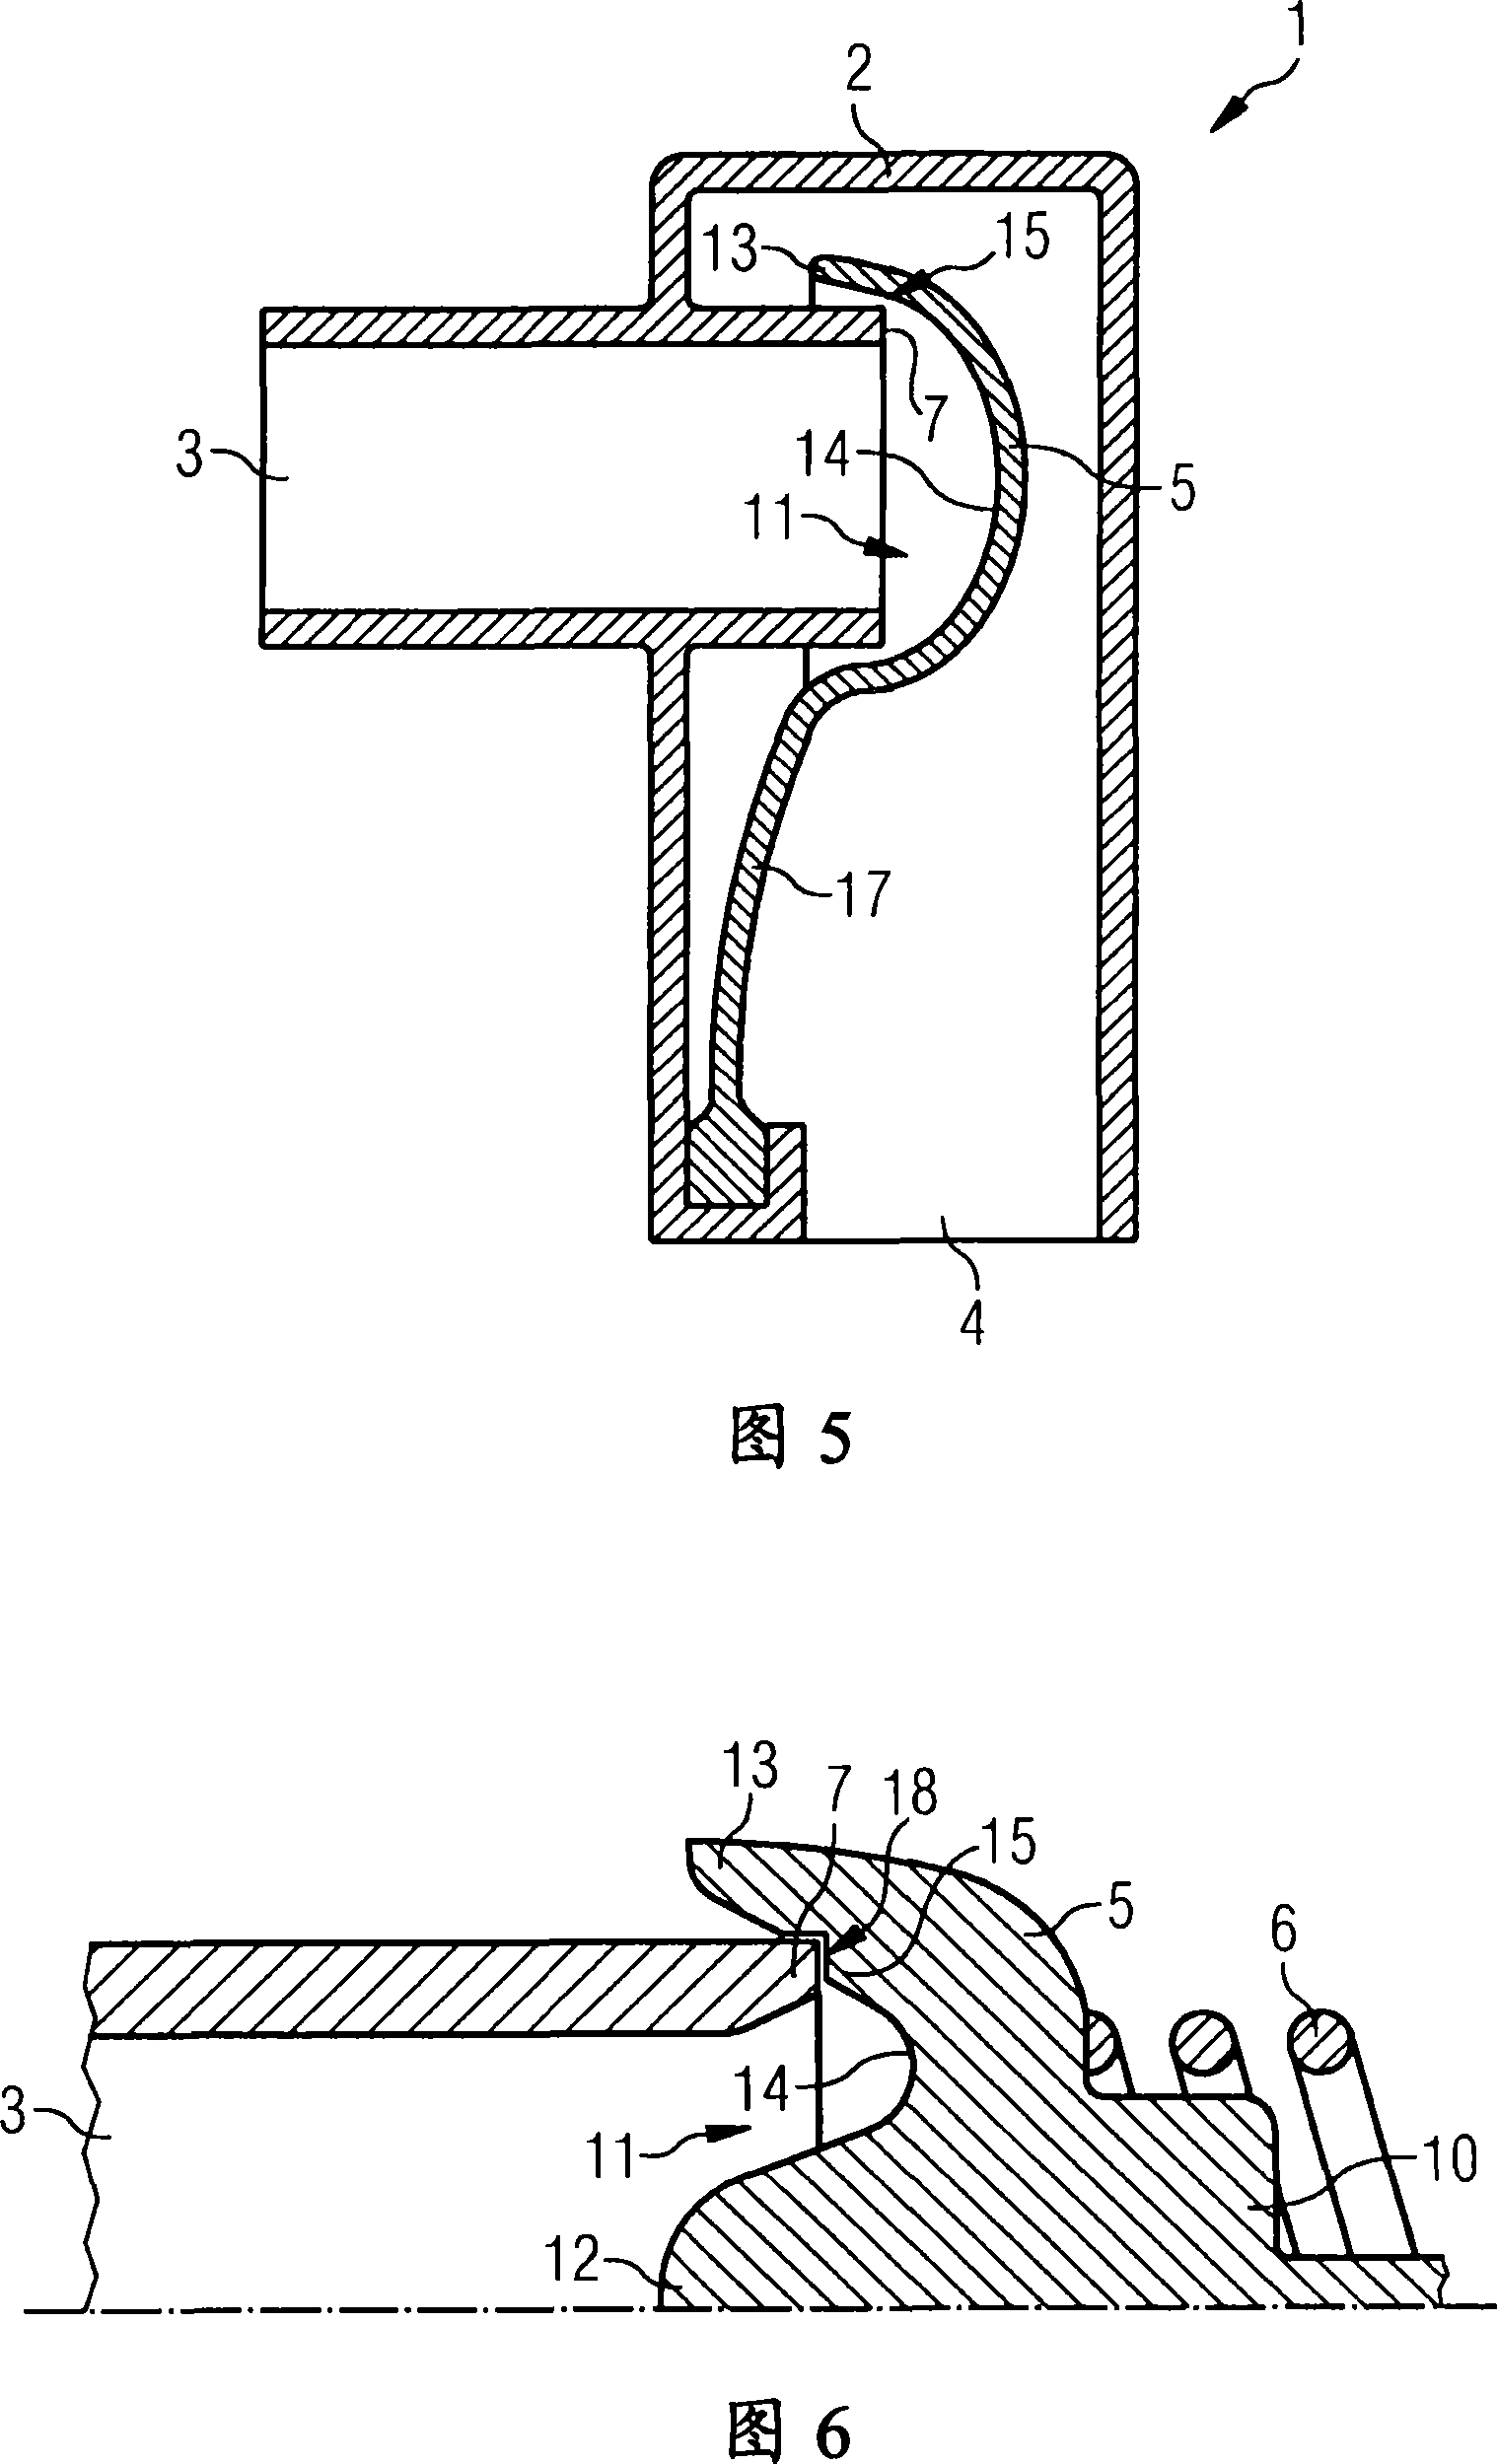 Valve for use in a fuel line of a motor vehicle